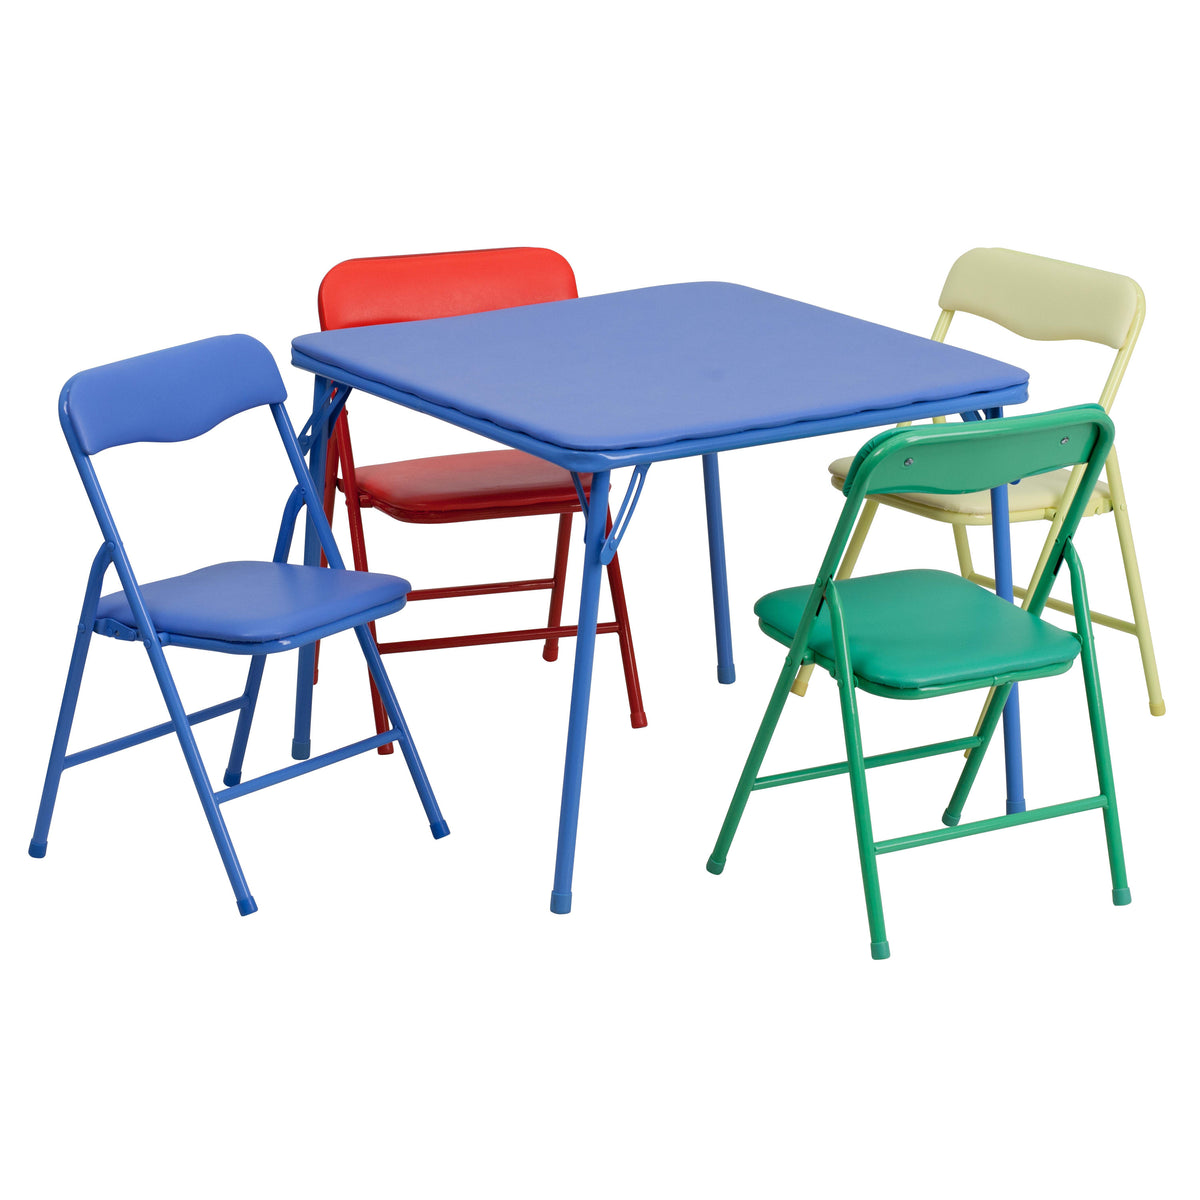 Multi-Color |#| Kids Colorful 5 Piece Padded Folding Table and Chair Set - Kids Game Table